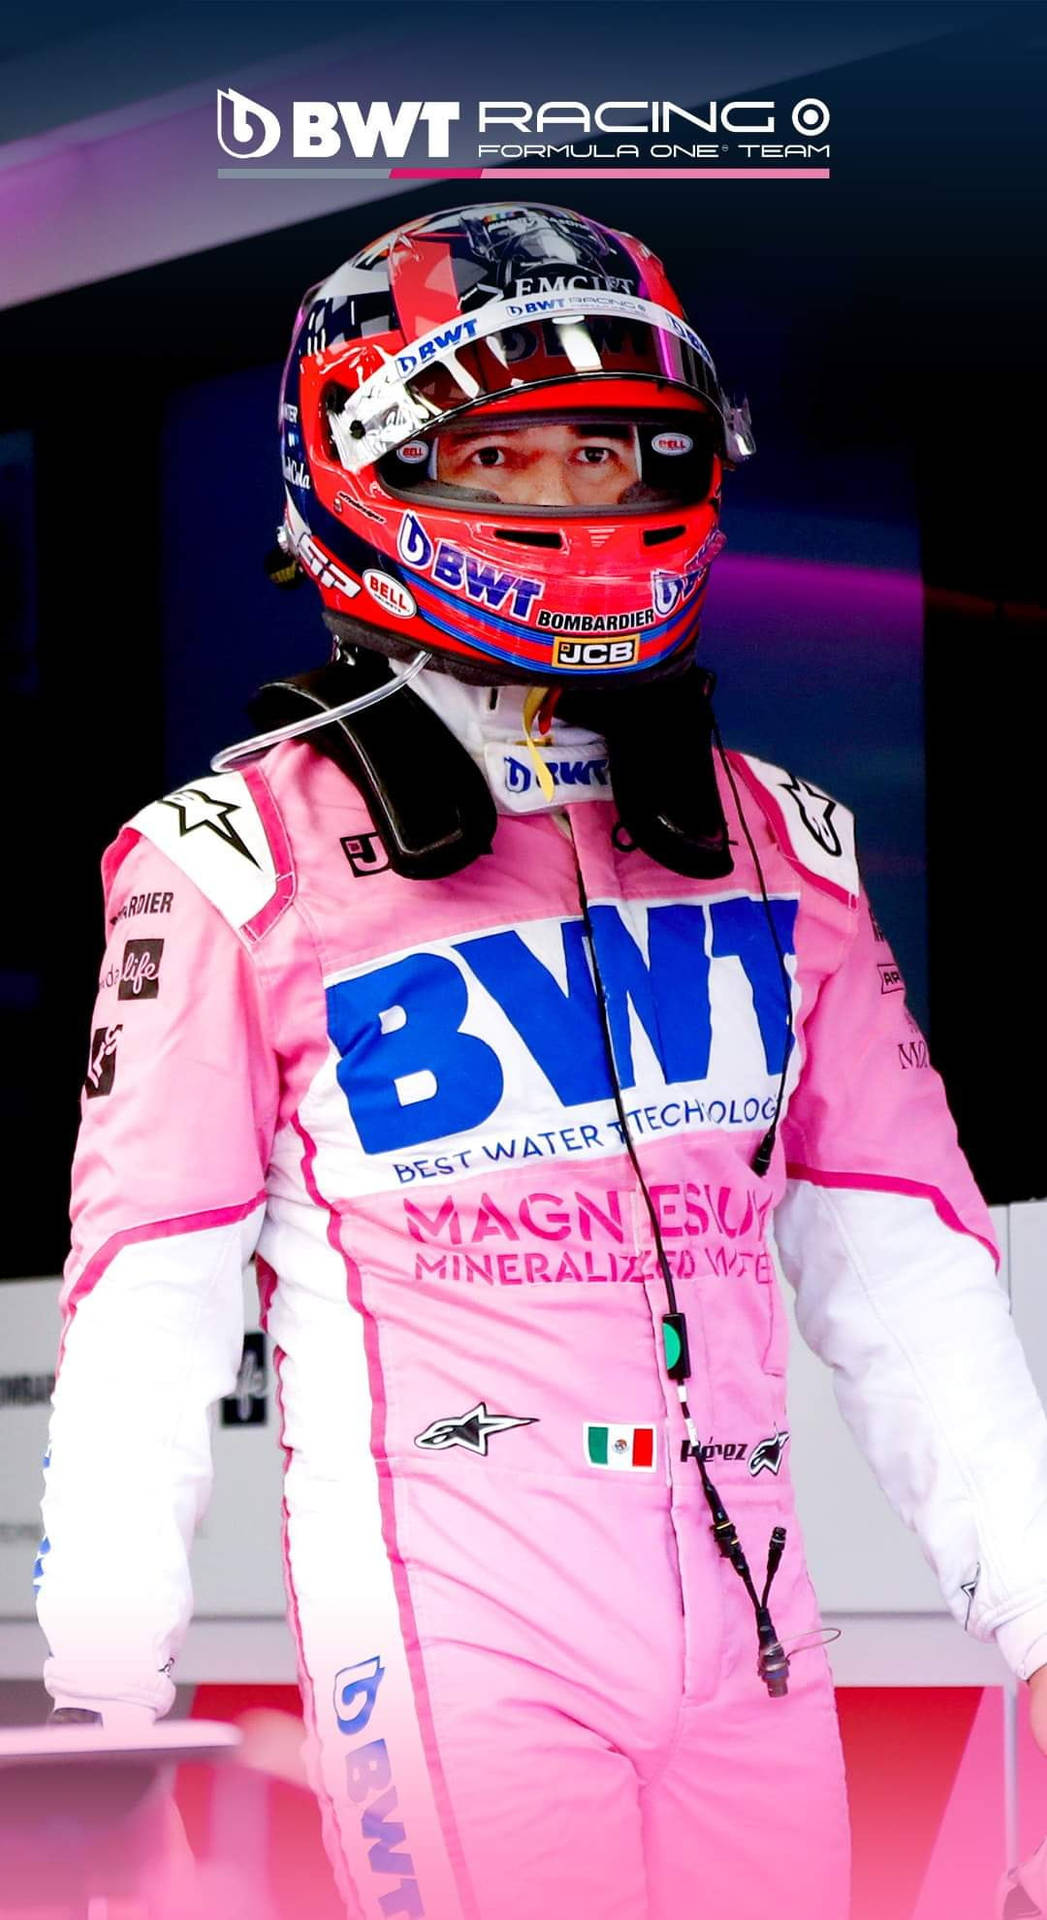 F1 Race Driver Sergio Perez in Pink Race Suit Wallpaper